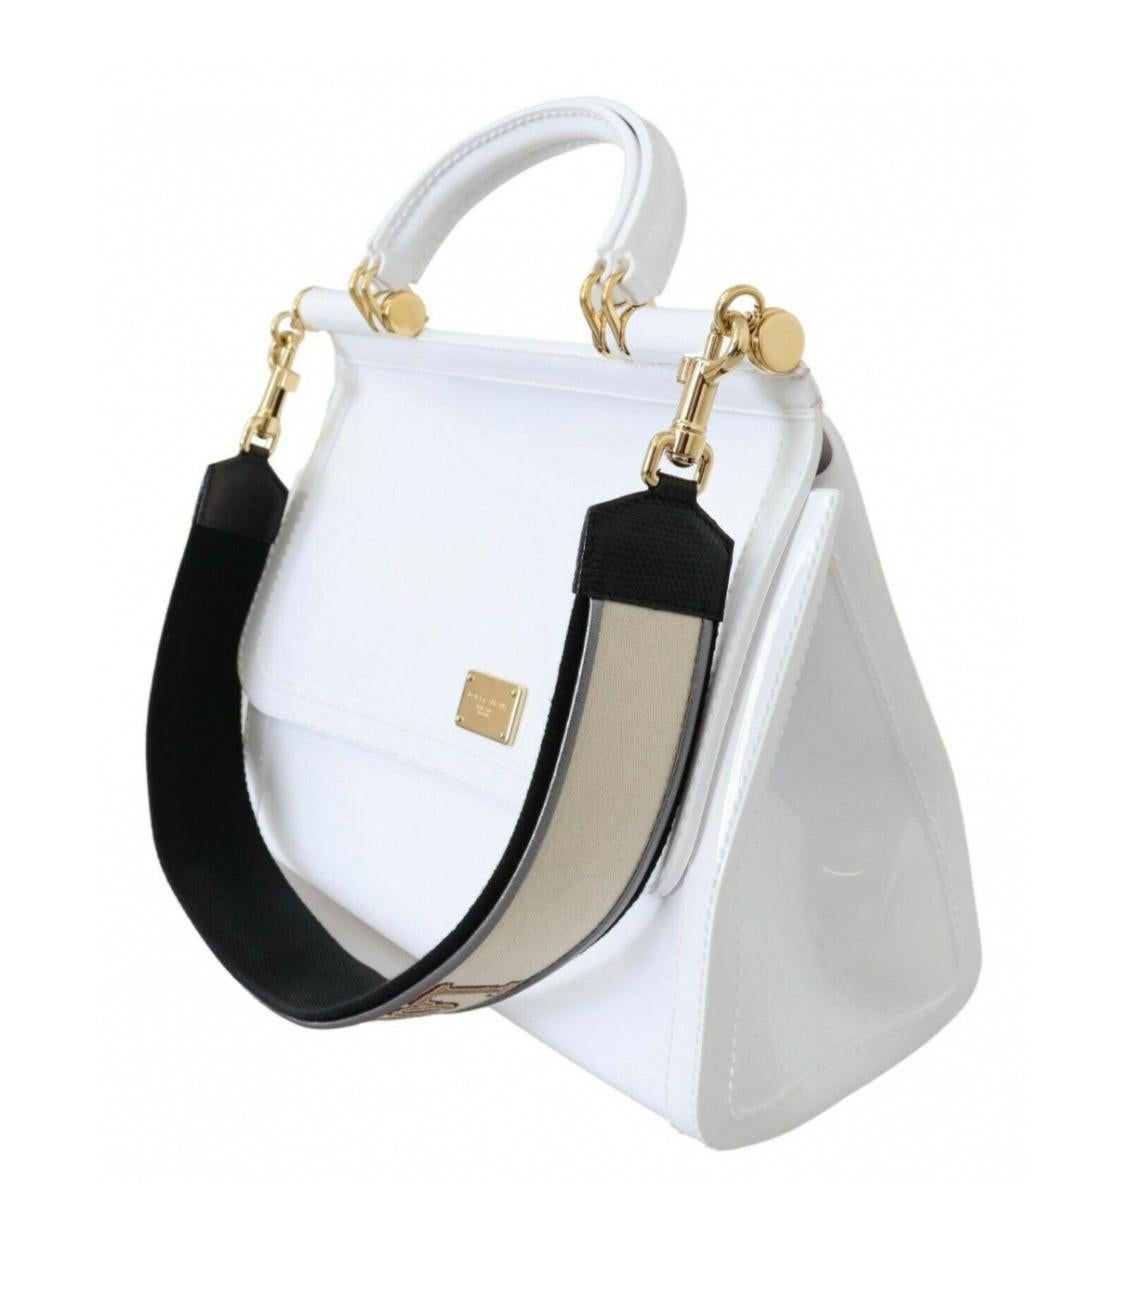 Absolutely stunning, 100%
Authentic, brand new with tags Dolce
& Gabbana SICILY PVC shoulder bag
with logo plaque and gold metal
detailing featuring a detachable strap,
handle strap and magnetic flap closure.
Model: Sicily Bag

Color: White with